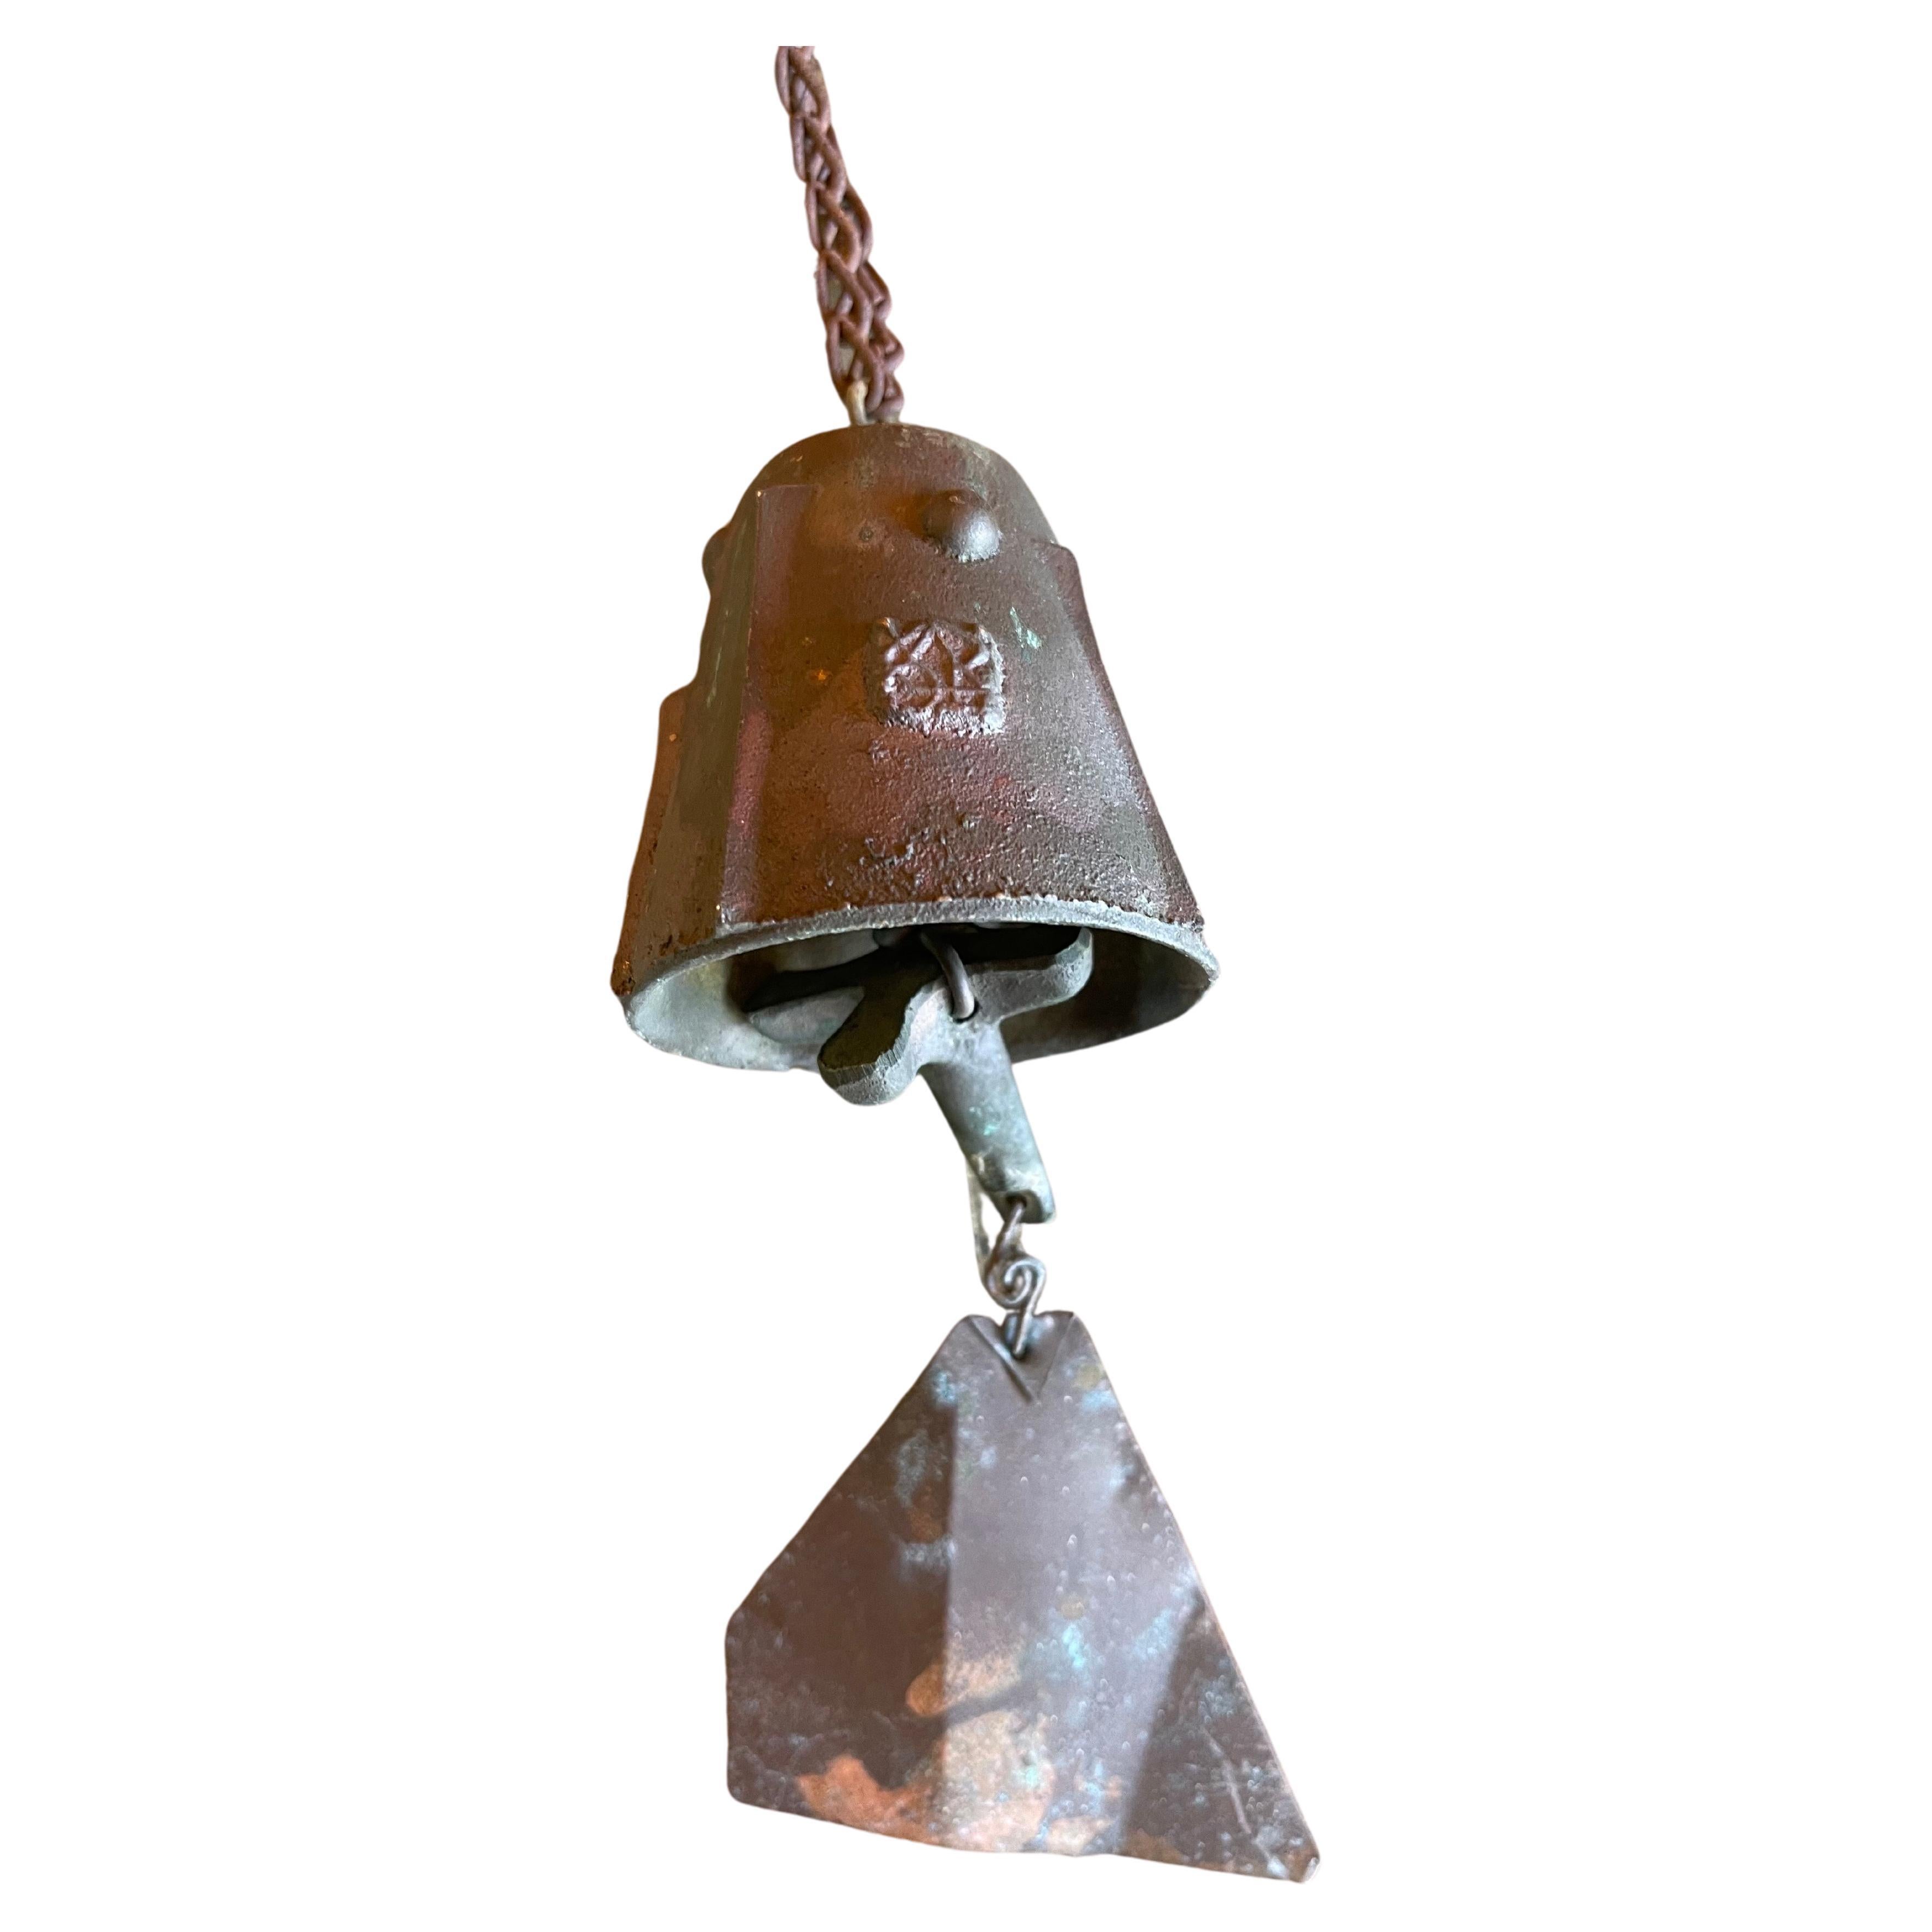 Mid-Century Modern Small Bronze Wind Chime / Bell by Paolo Soleri for Cosanti